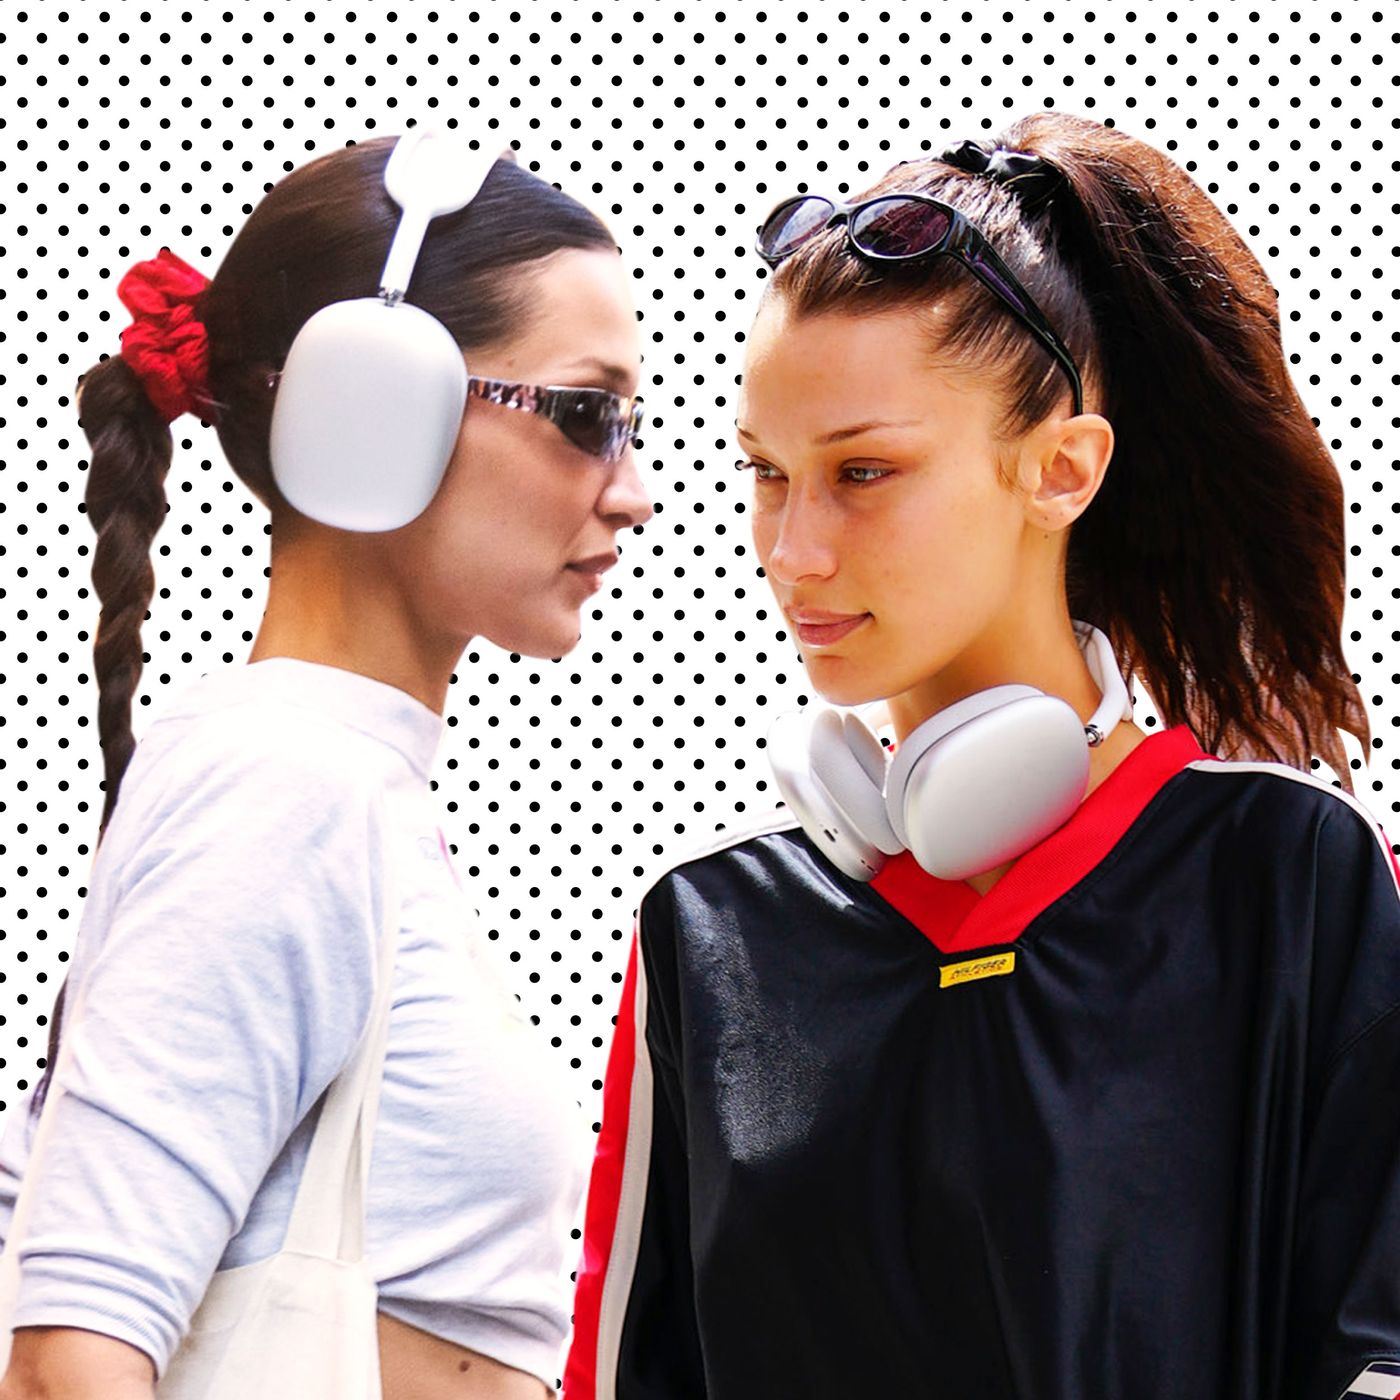 Apple AirPods Max Review: Bella Hadid Made Me Buy It